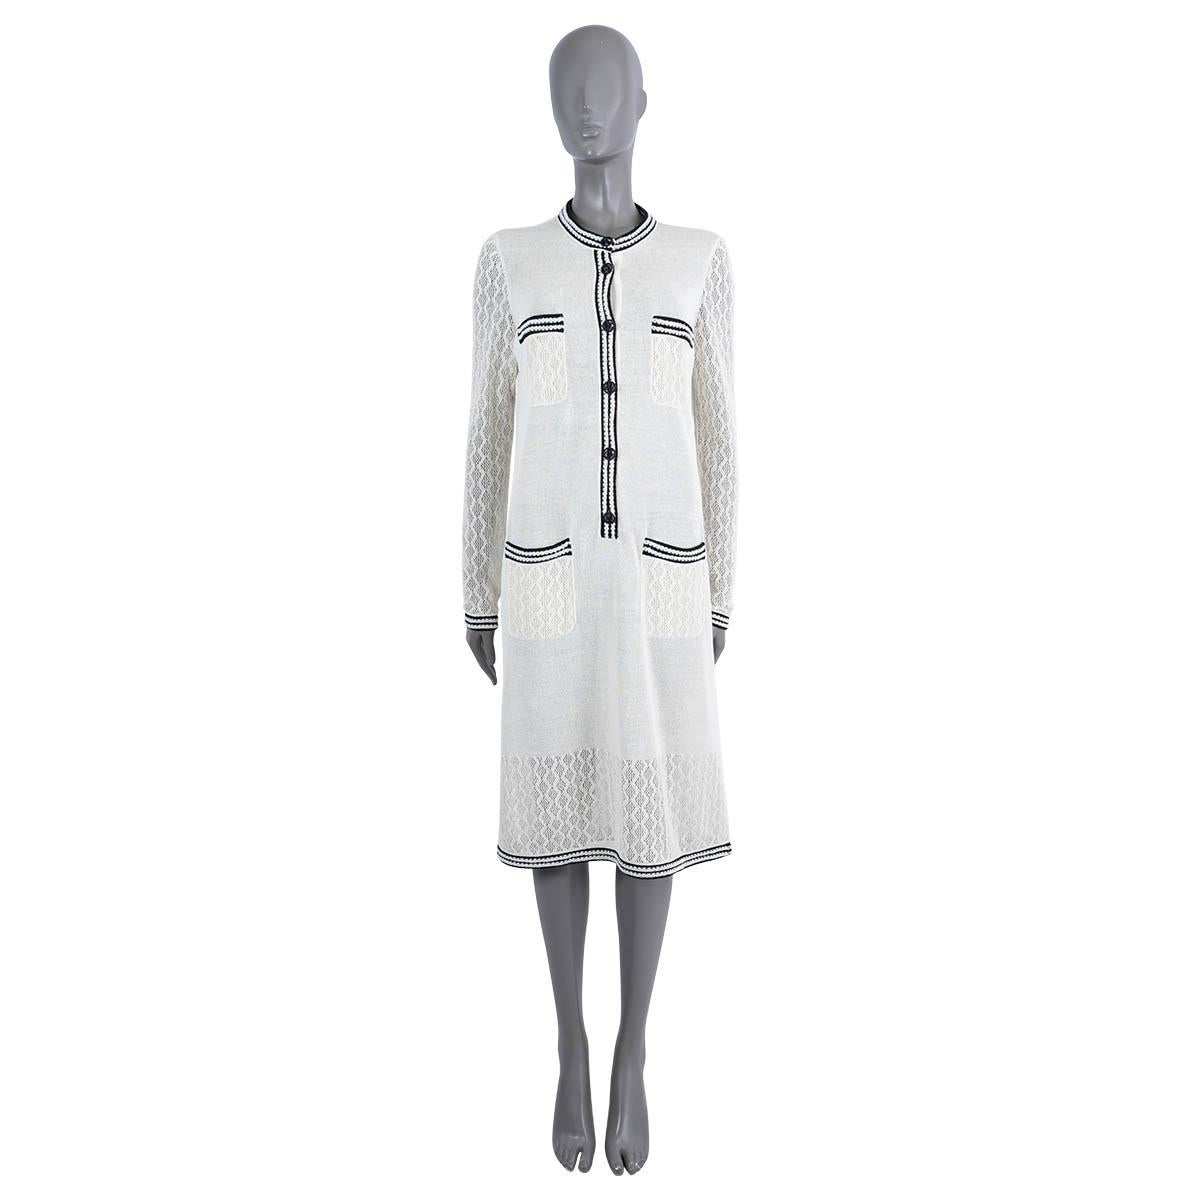 100% authentic Chanel semi-sheer knit dress in ivory silk (87%) and polyester (13%). Features a round neck, crochet sleeves, hem and four patch pockets on the front. Black and white striped viscose trim. Opens with black CC buttons on the front.